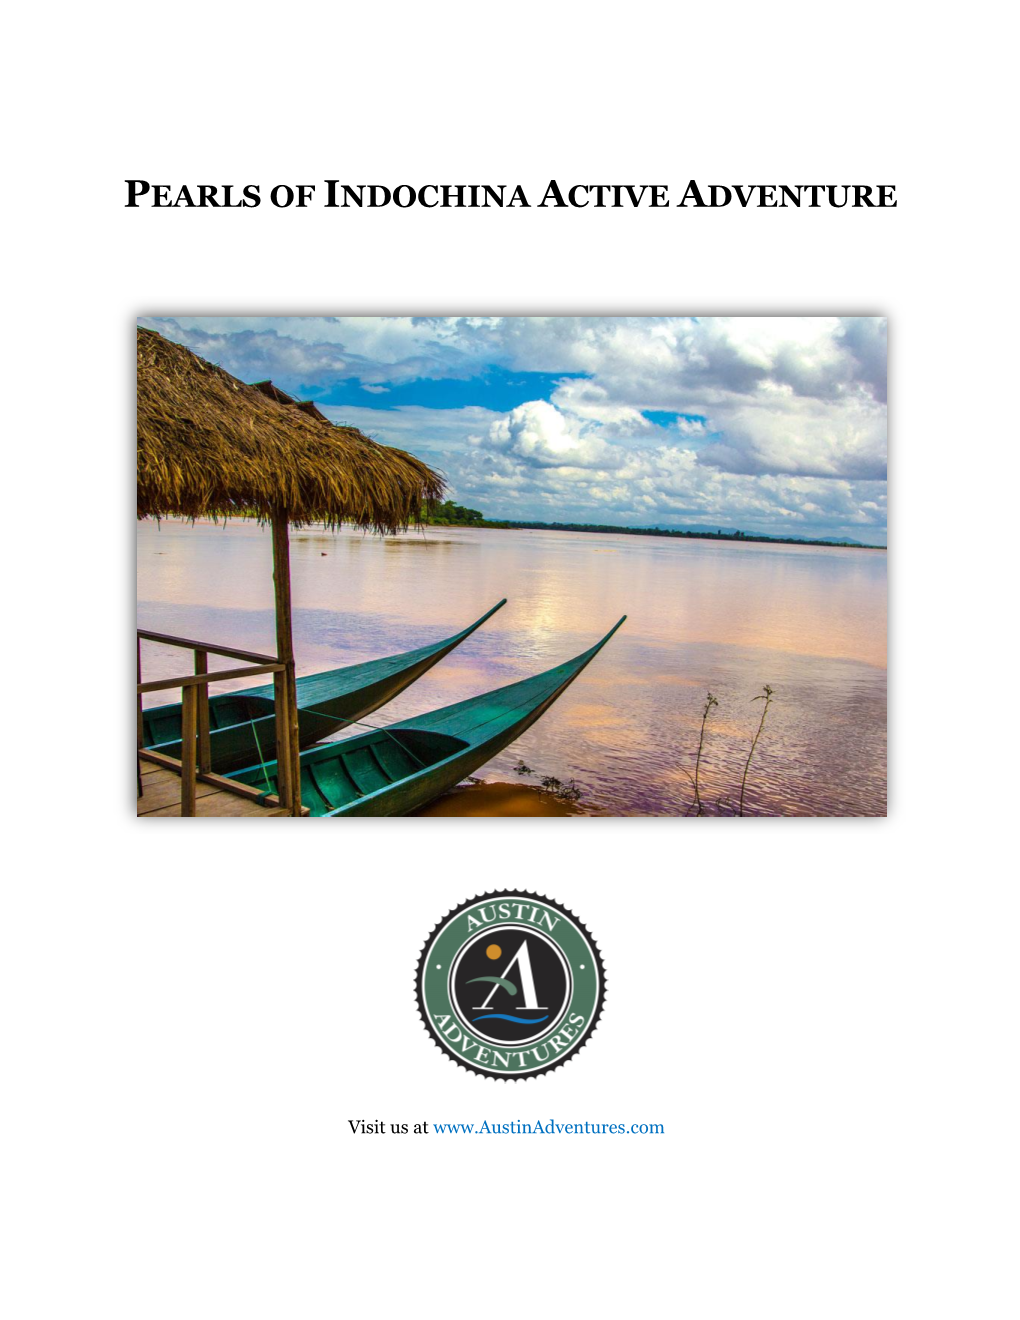 Pearls of Indochina Active Adventure